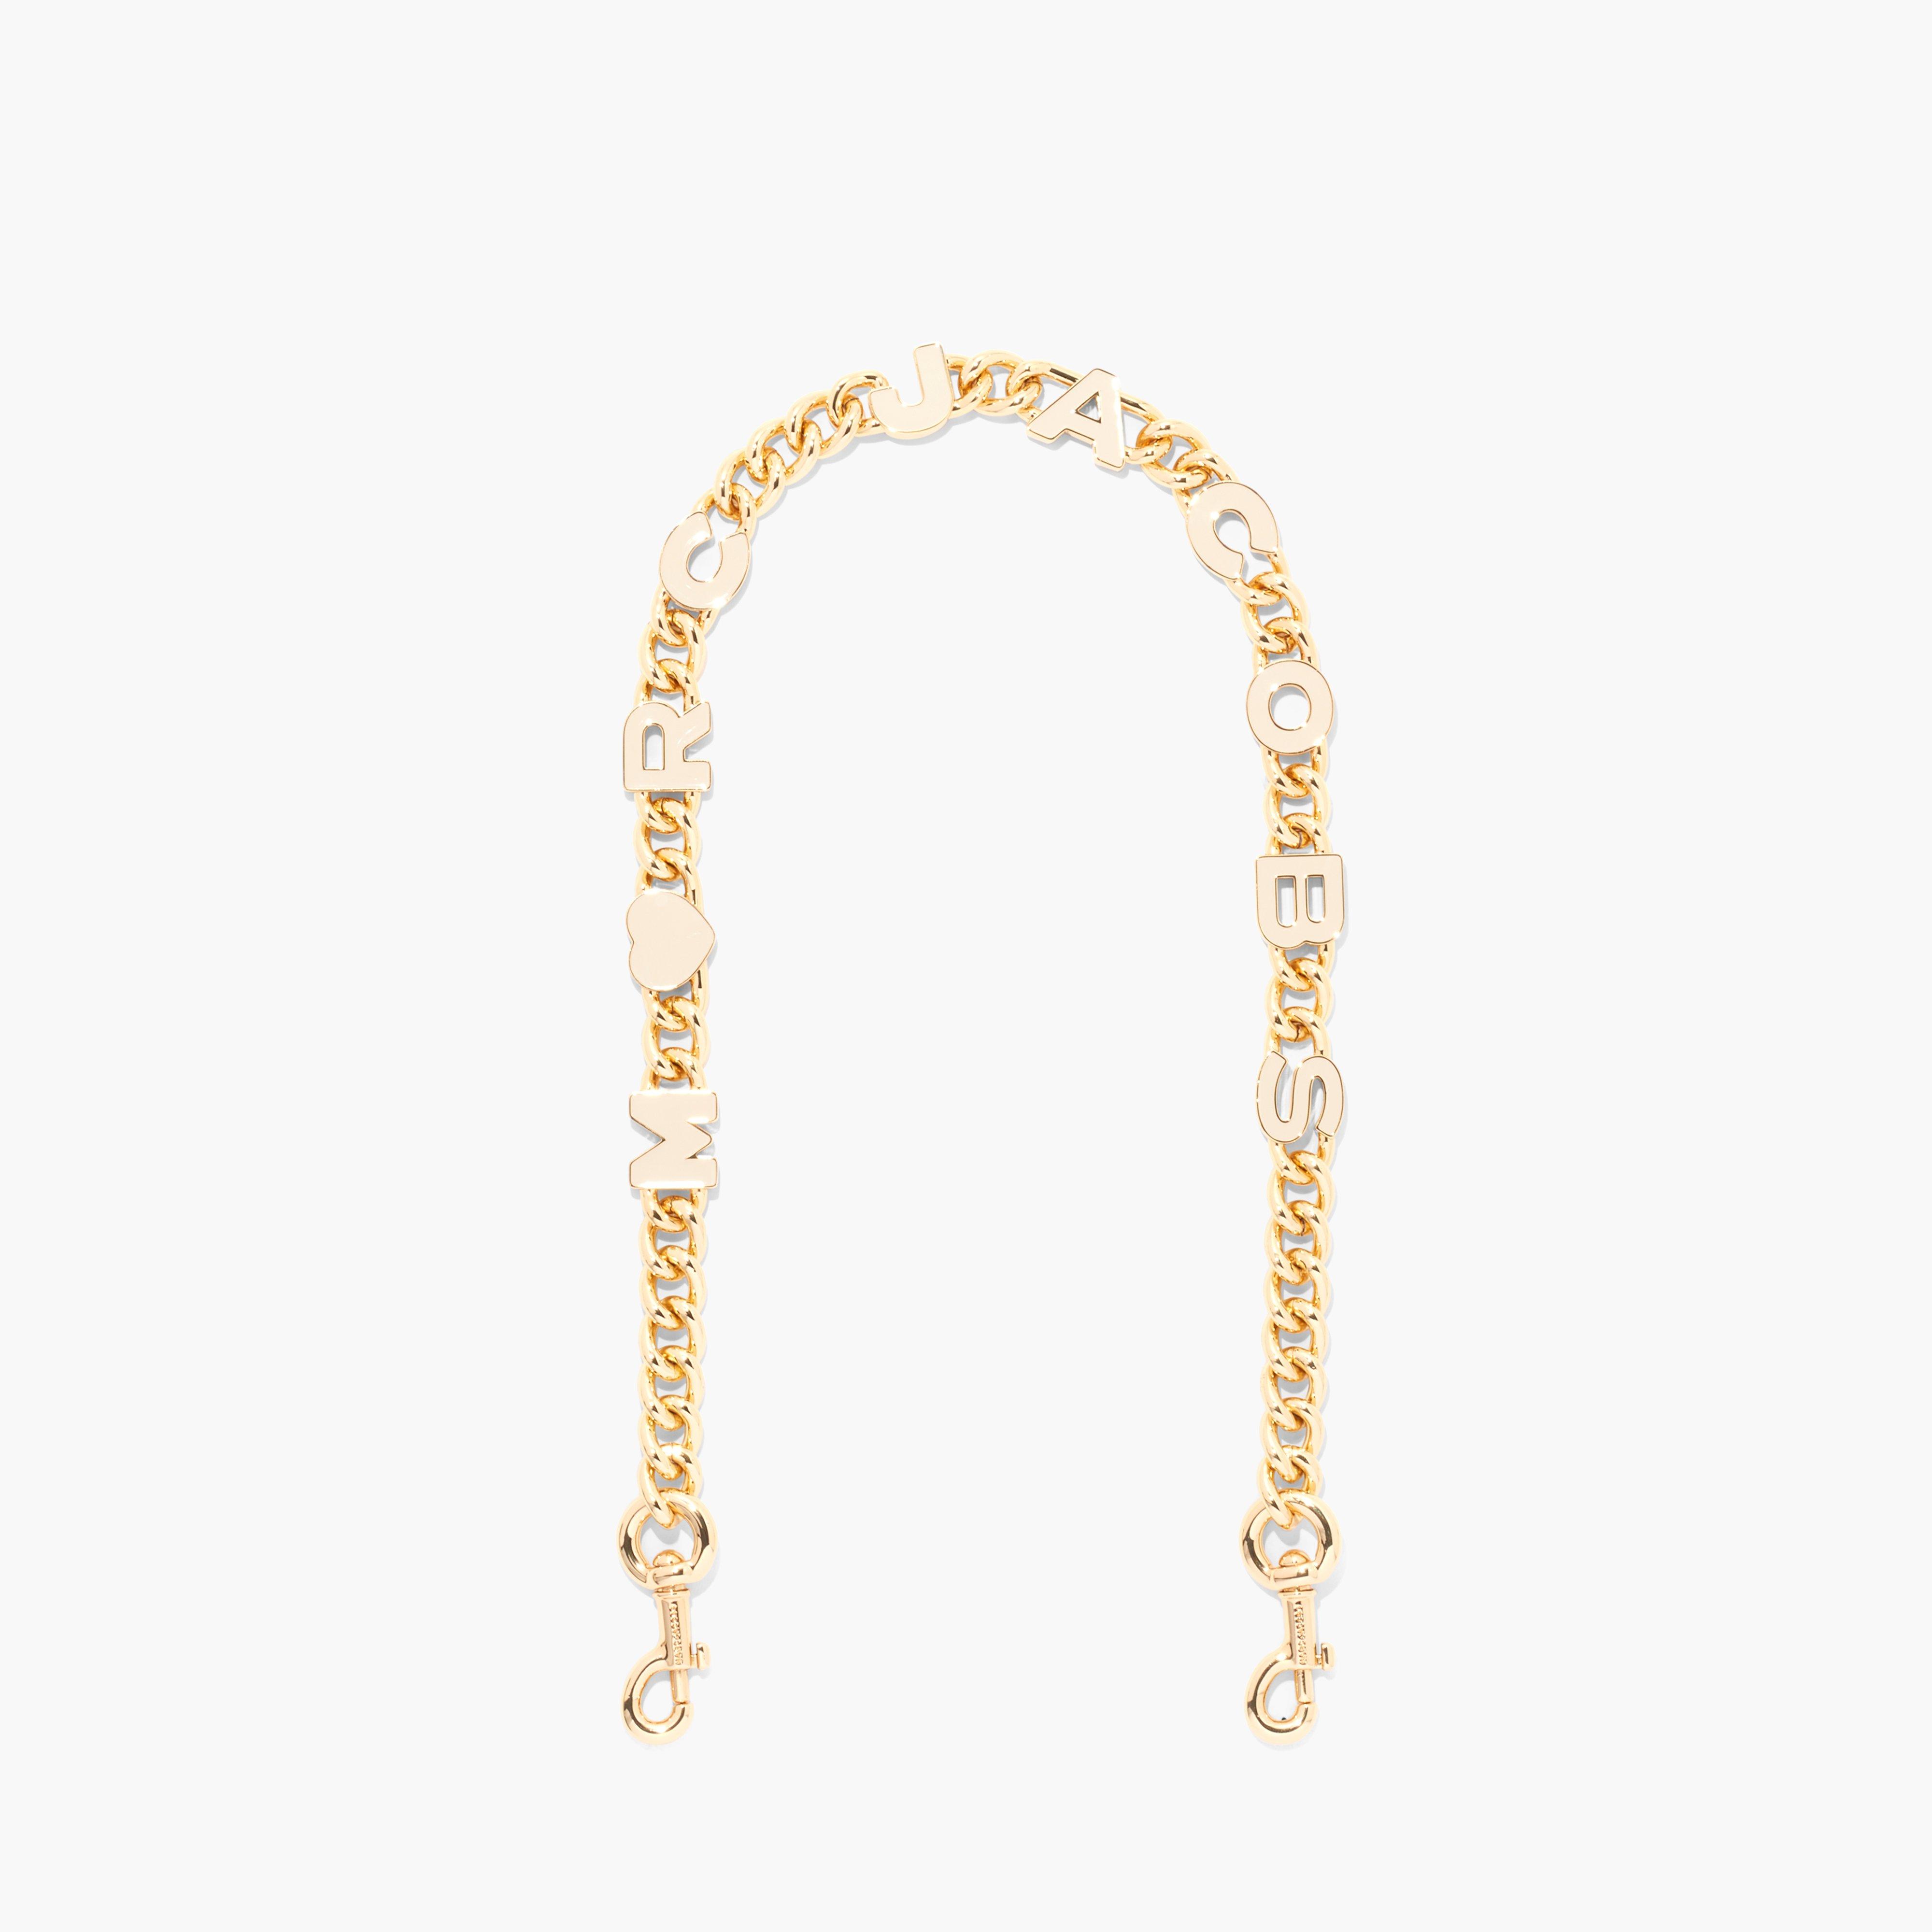 Marc by Marc jacobs The Heart Charm Chain Shoulder Strap,CLOUD WHITE/GOLD